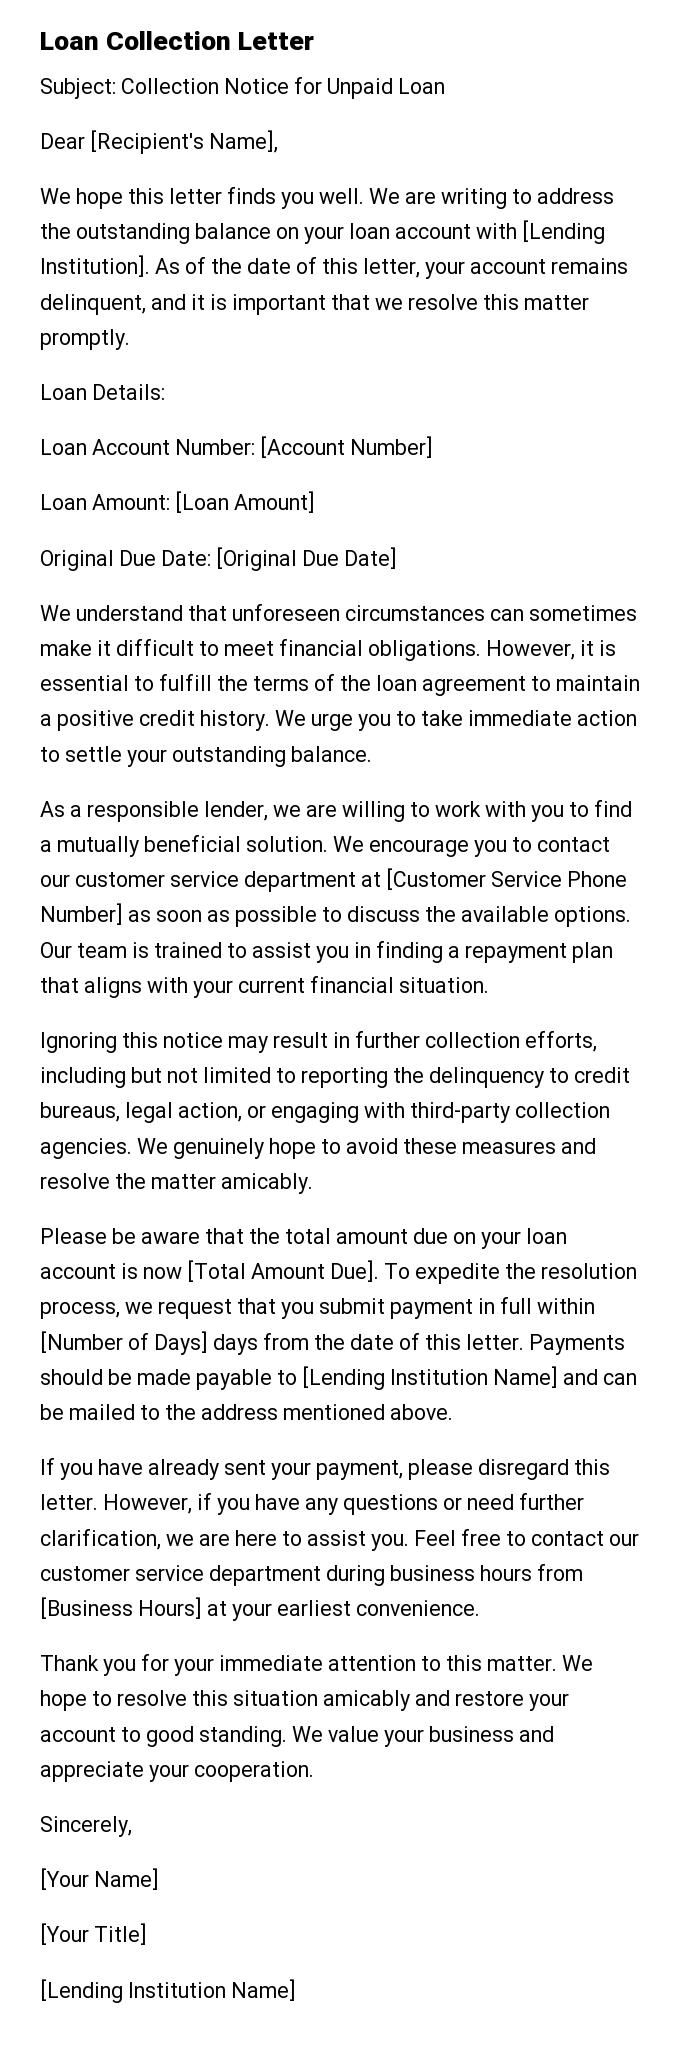 Loan Collection Letter